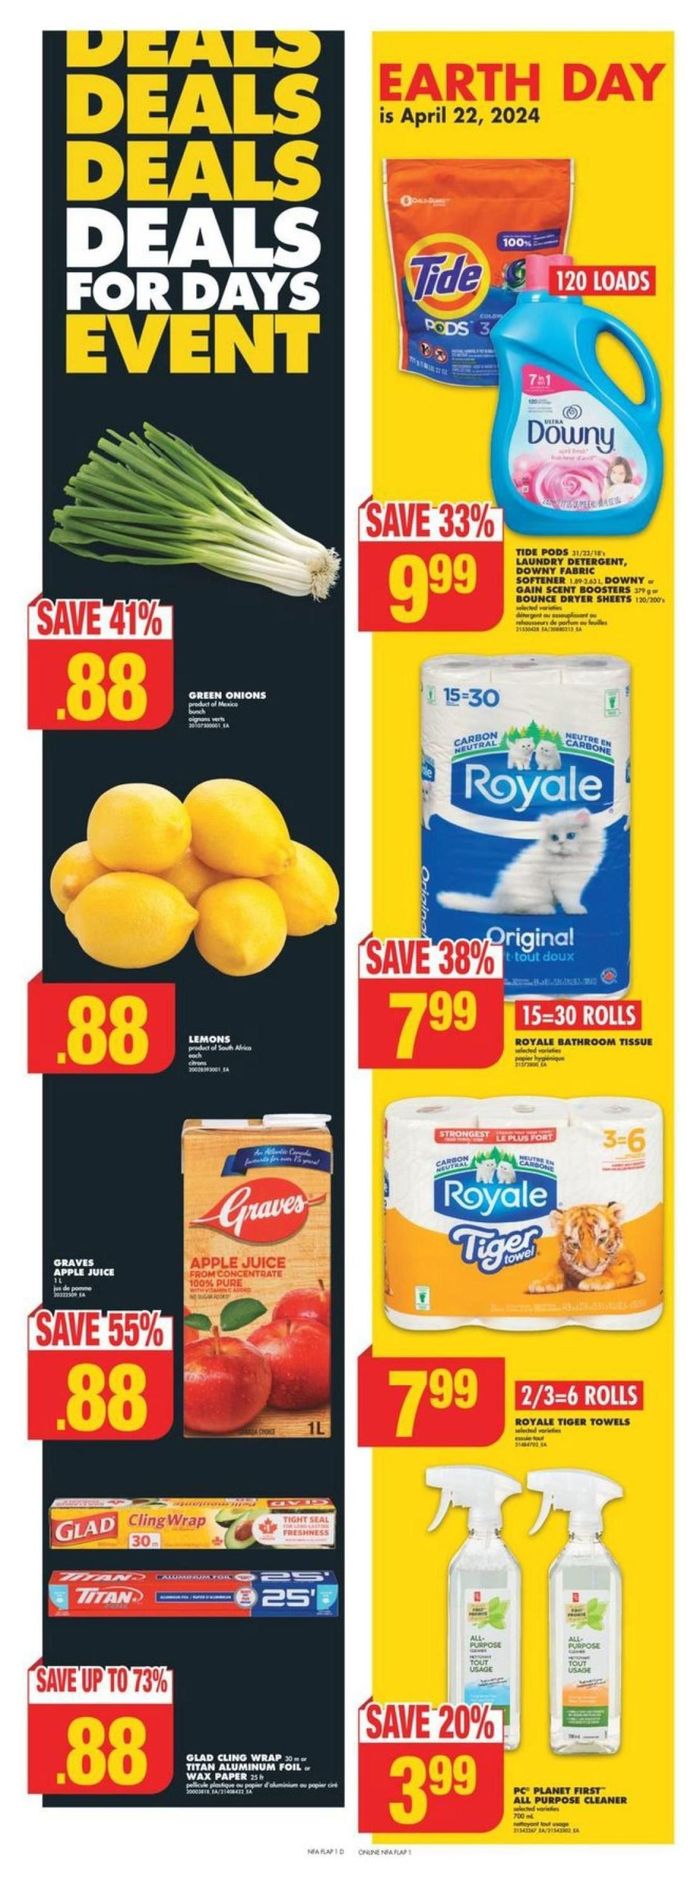 No Frills catalogue in Halifax | Deals for Day's Event | 2024-04-18 - 2024-04-24